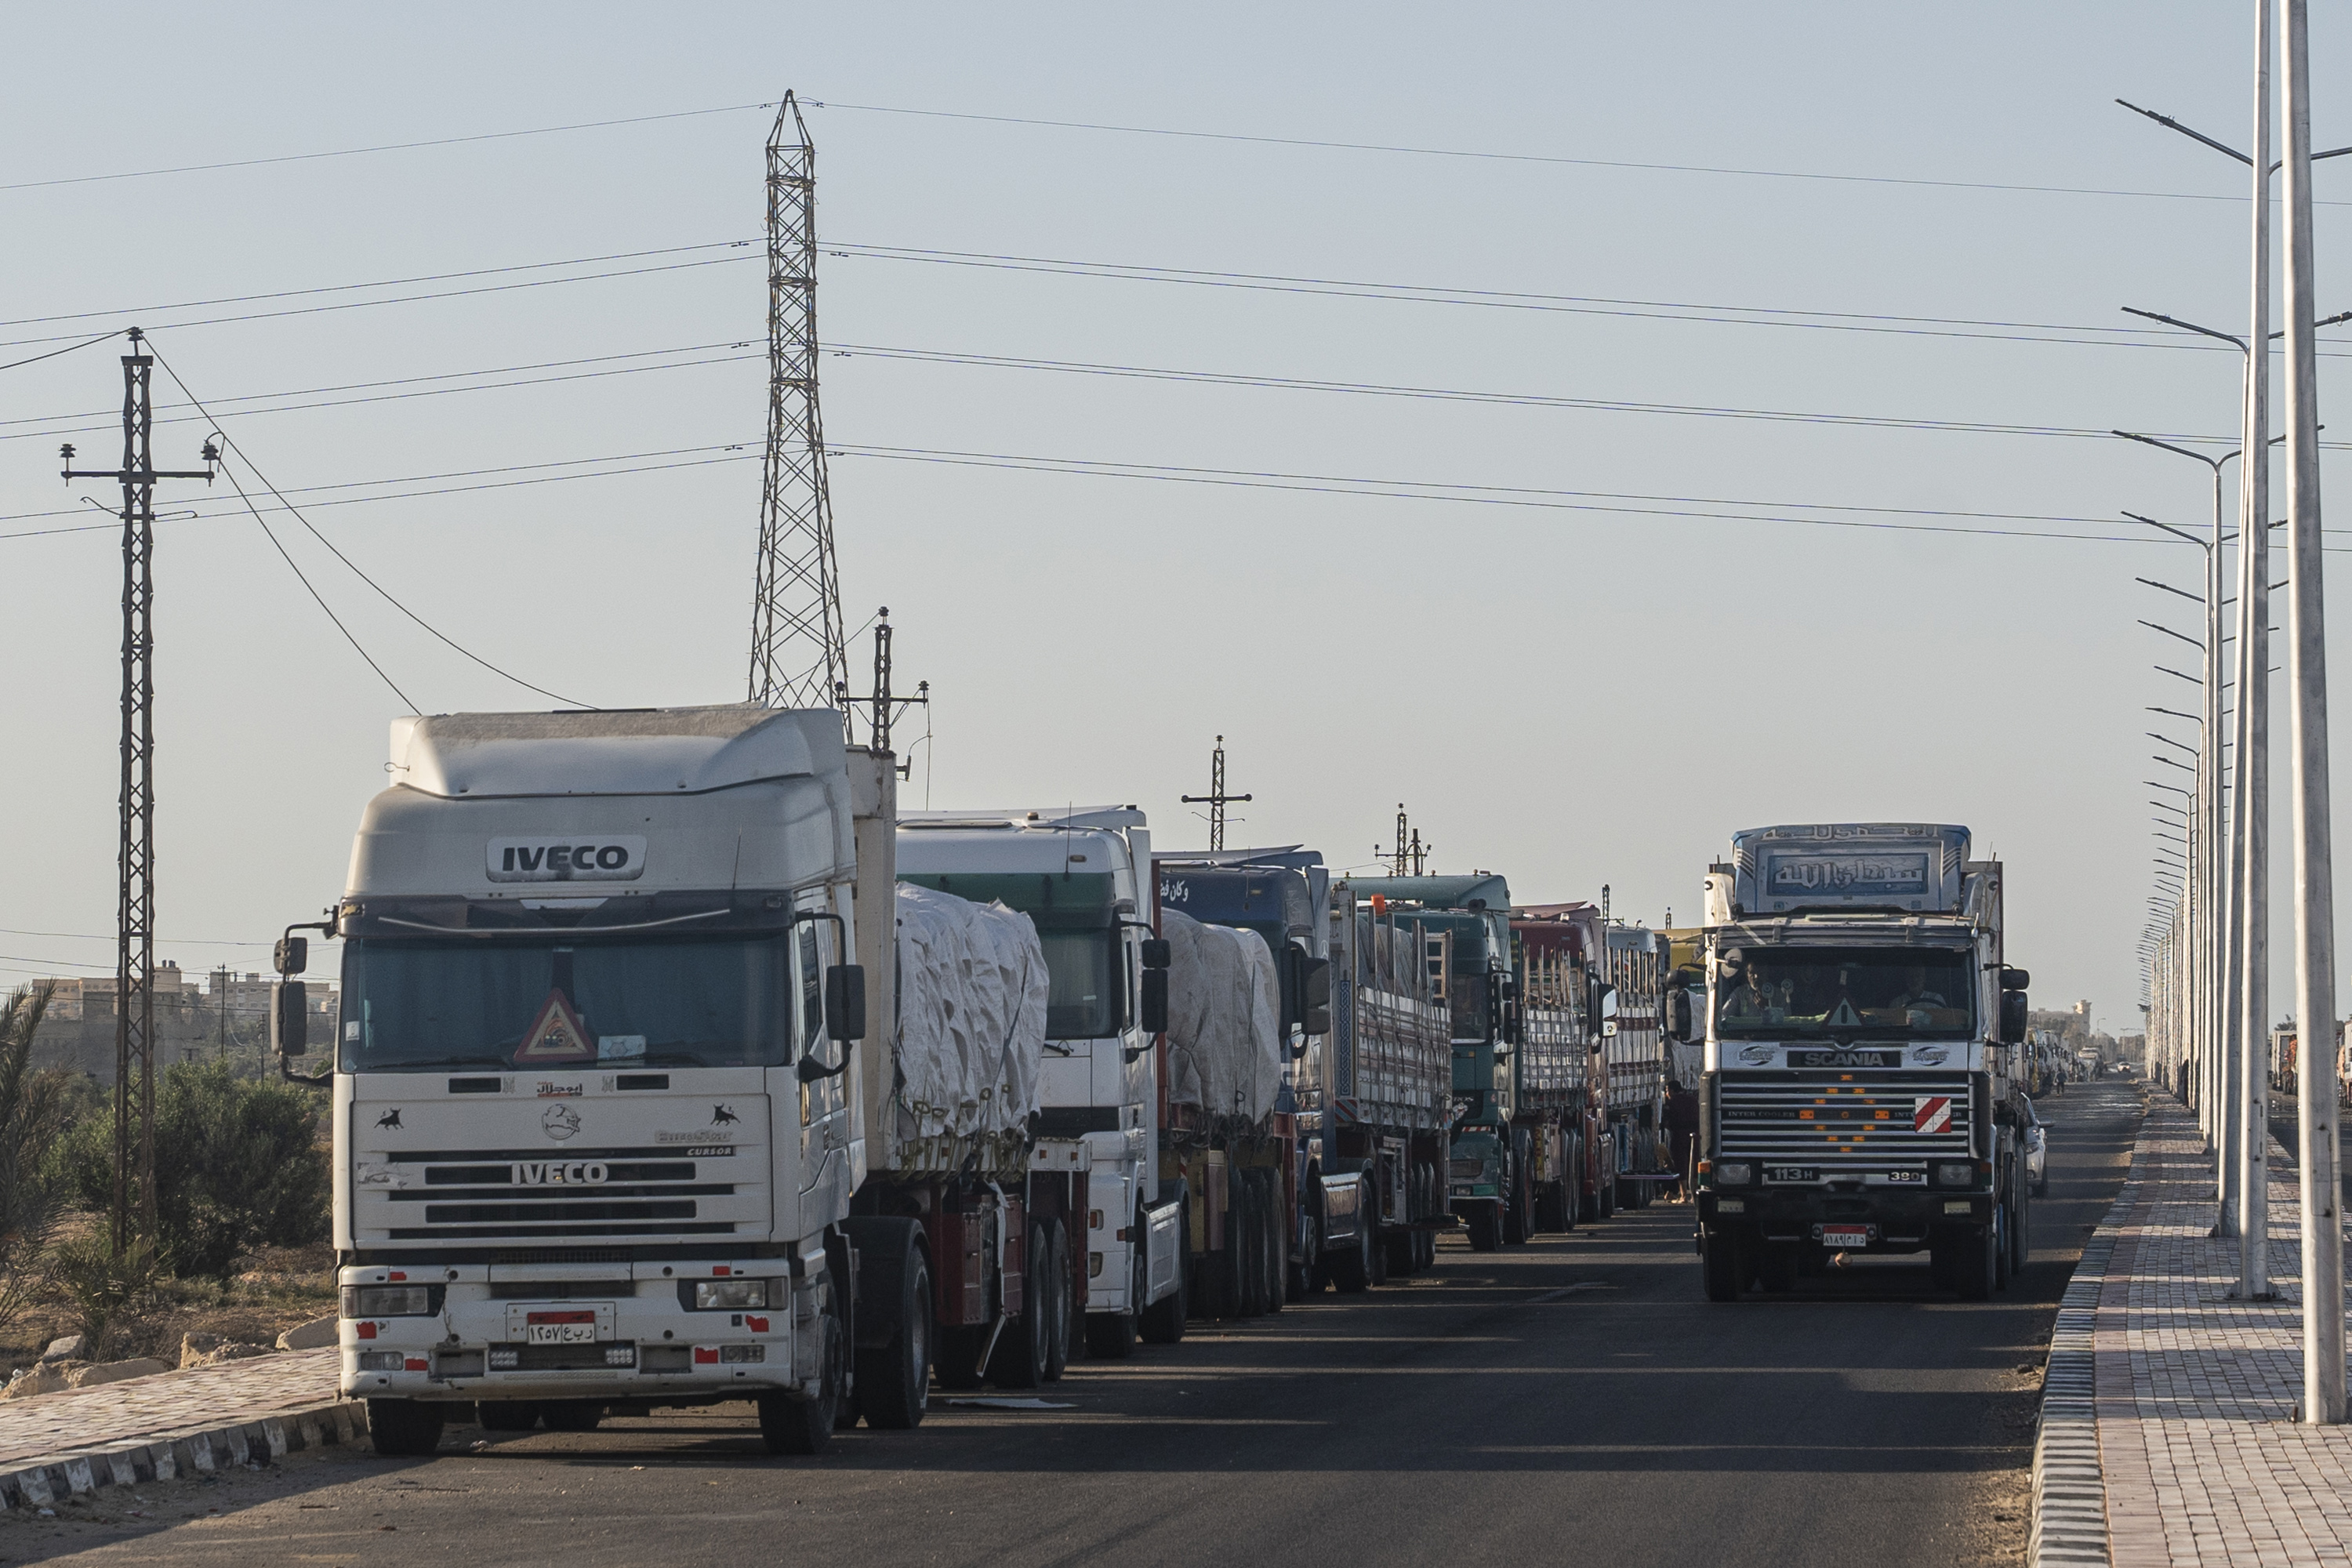 Aid trucks loaded with supplies for Gaza wait in Al-Arish City, Egypt, after the border closed on May 8.